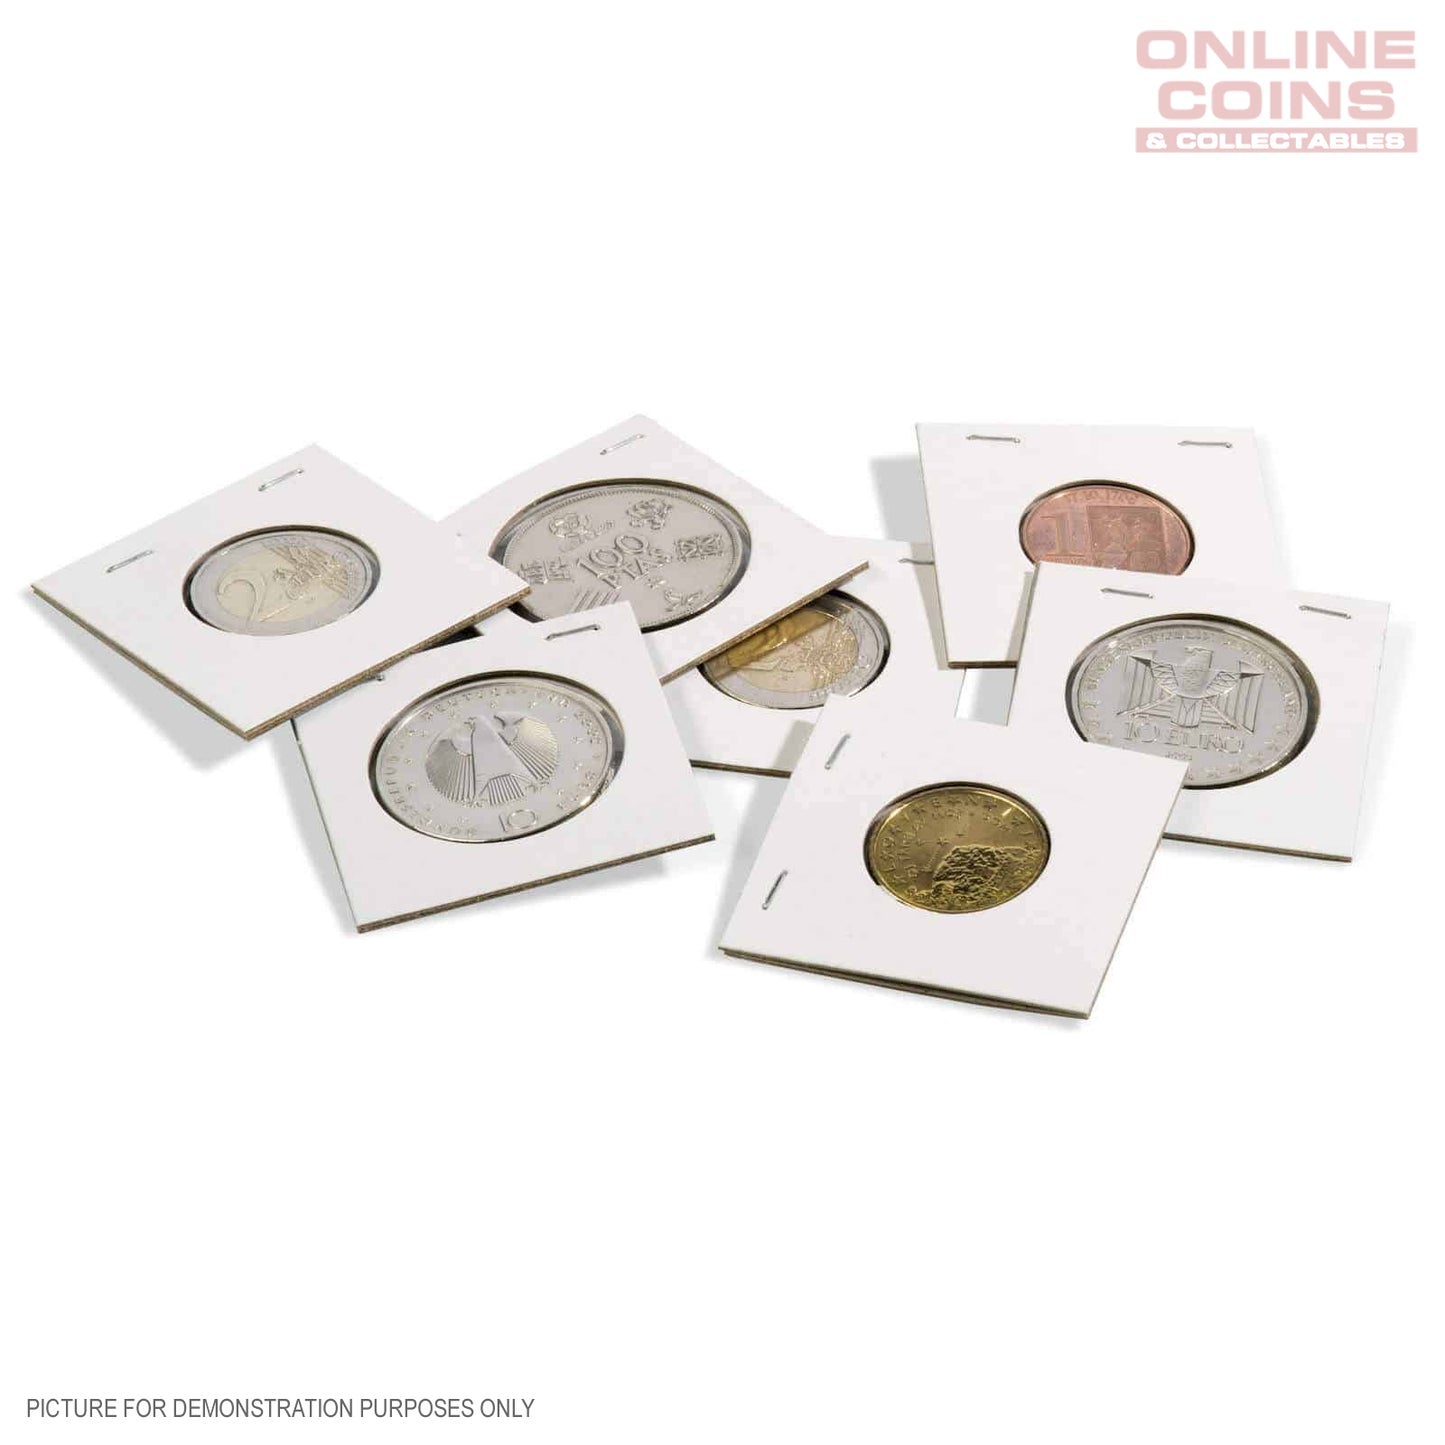 Lighthouse TACK Staple 2 x 2 Coin Holders x 100 - 17.5 mm - Listing is for Pack of 100 (Suitable For Australian Threepence Coins)